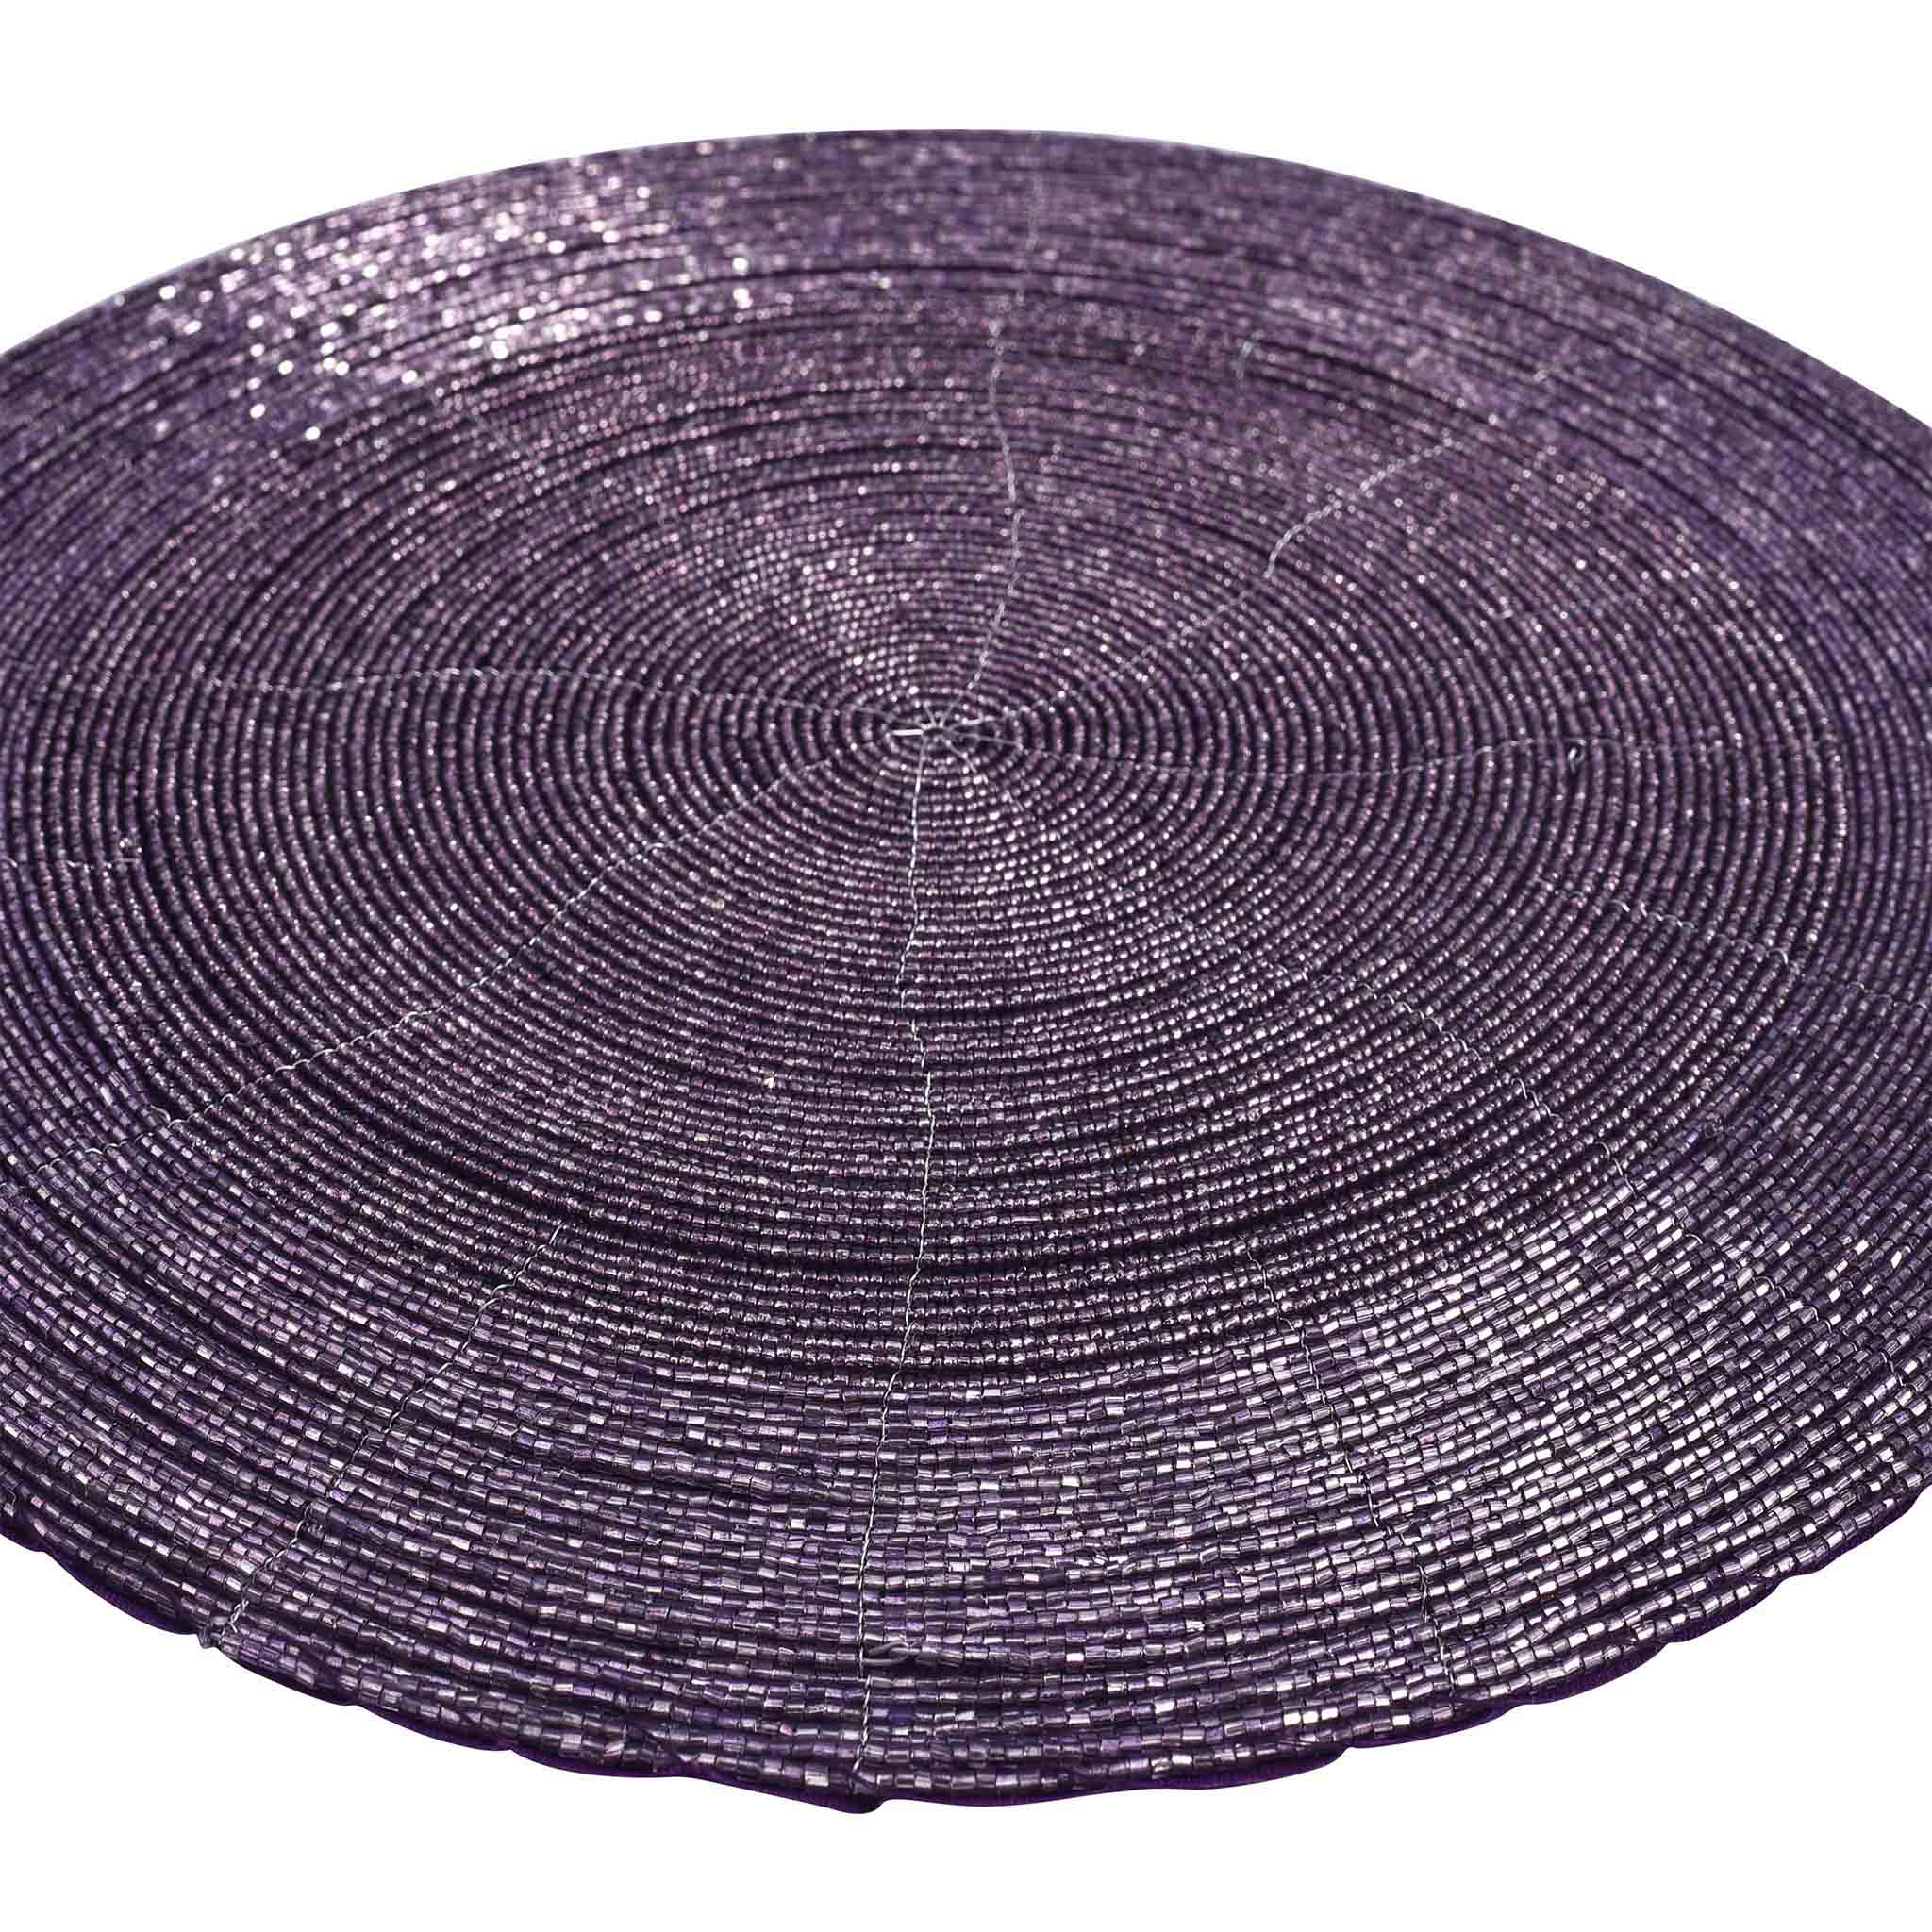 Glass Beaded Placemat in Two Tone Purple, Set of 4